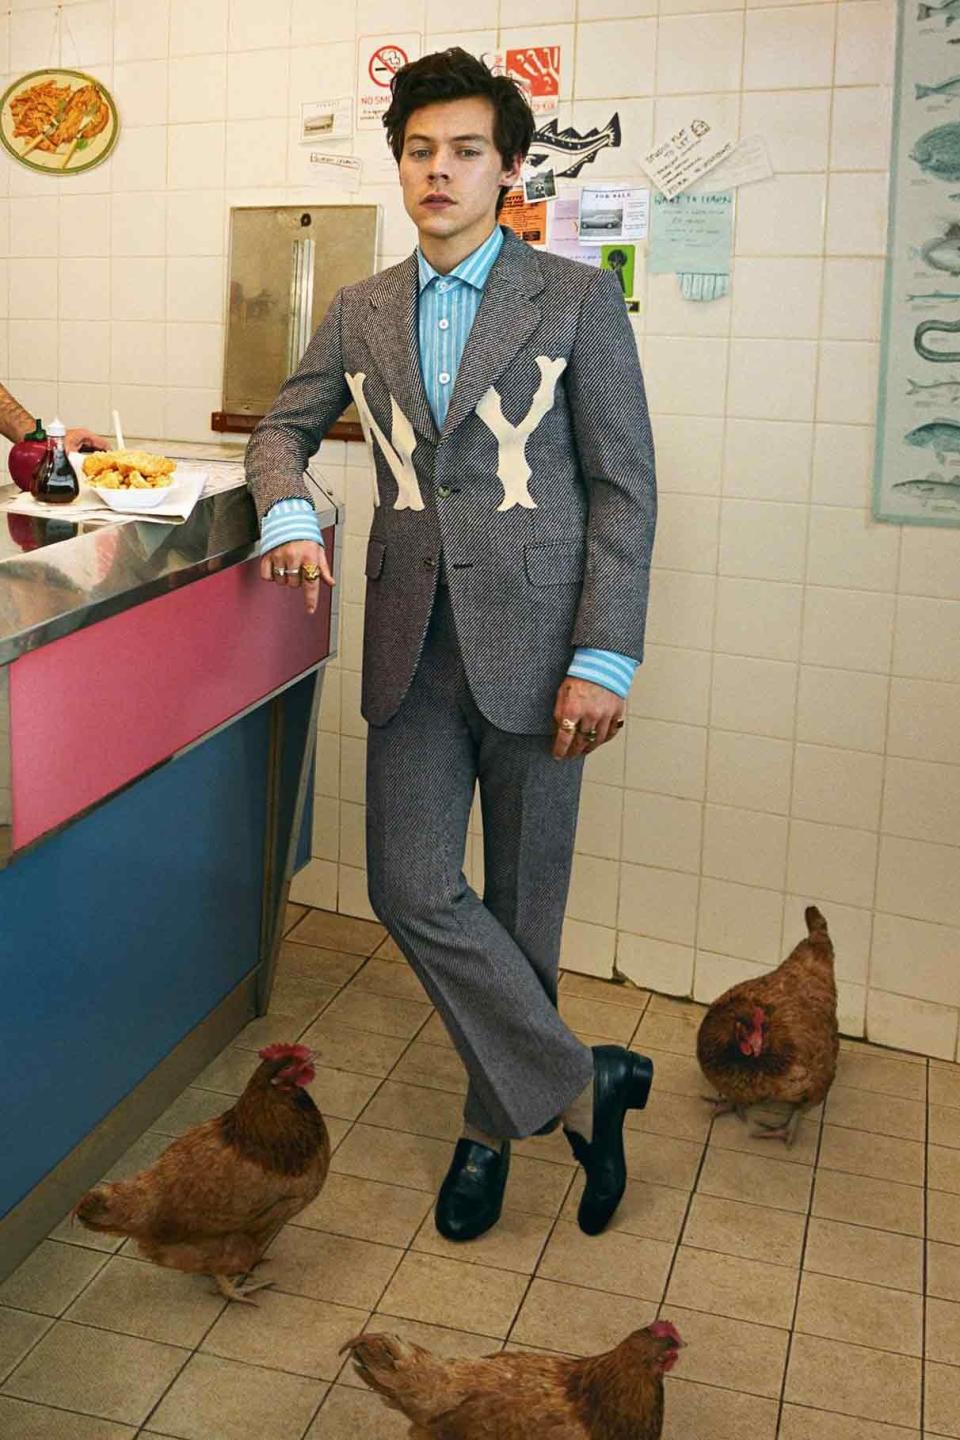 In Gucci at the chippy shop for his first-ever Gucci tailoring campaign shoot.